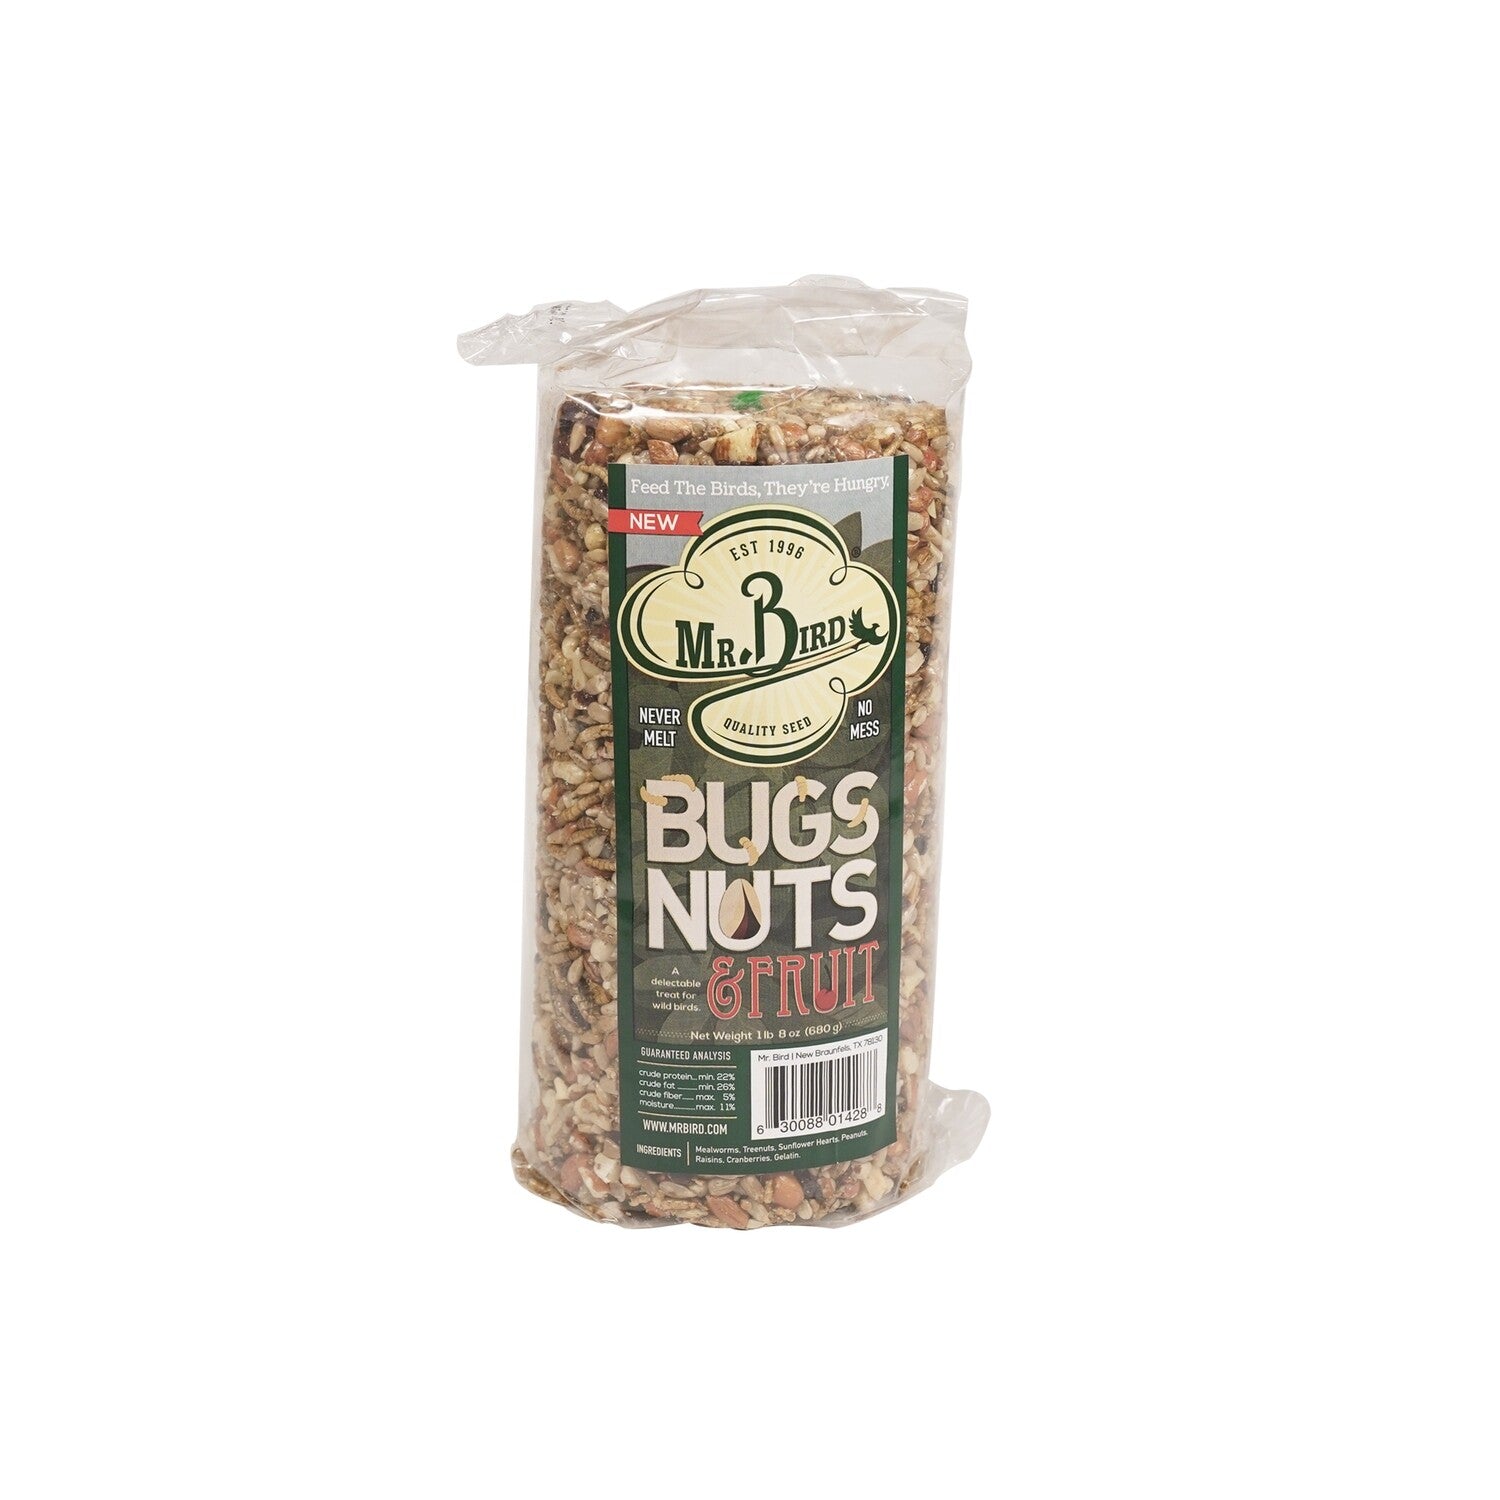 Bugs, Nuts & Fruit Seed Cakes